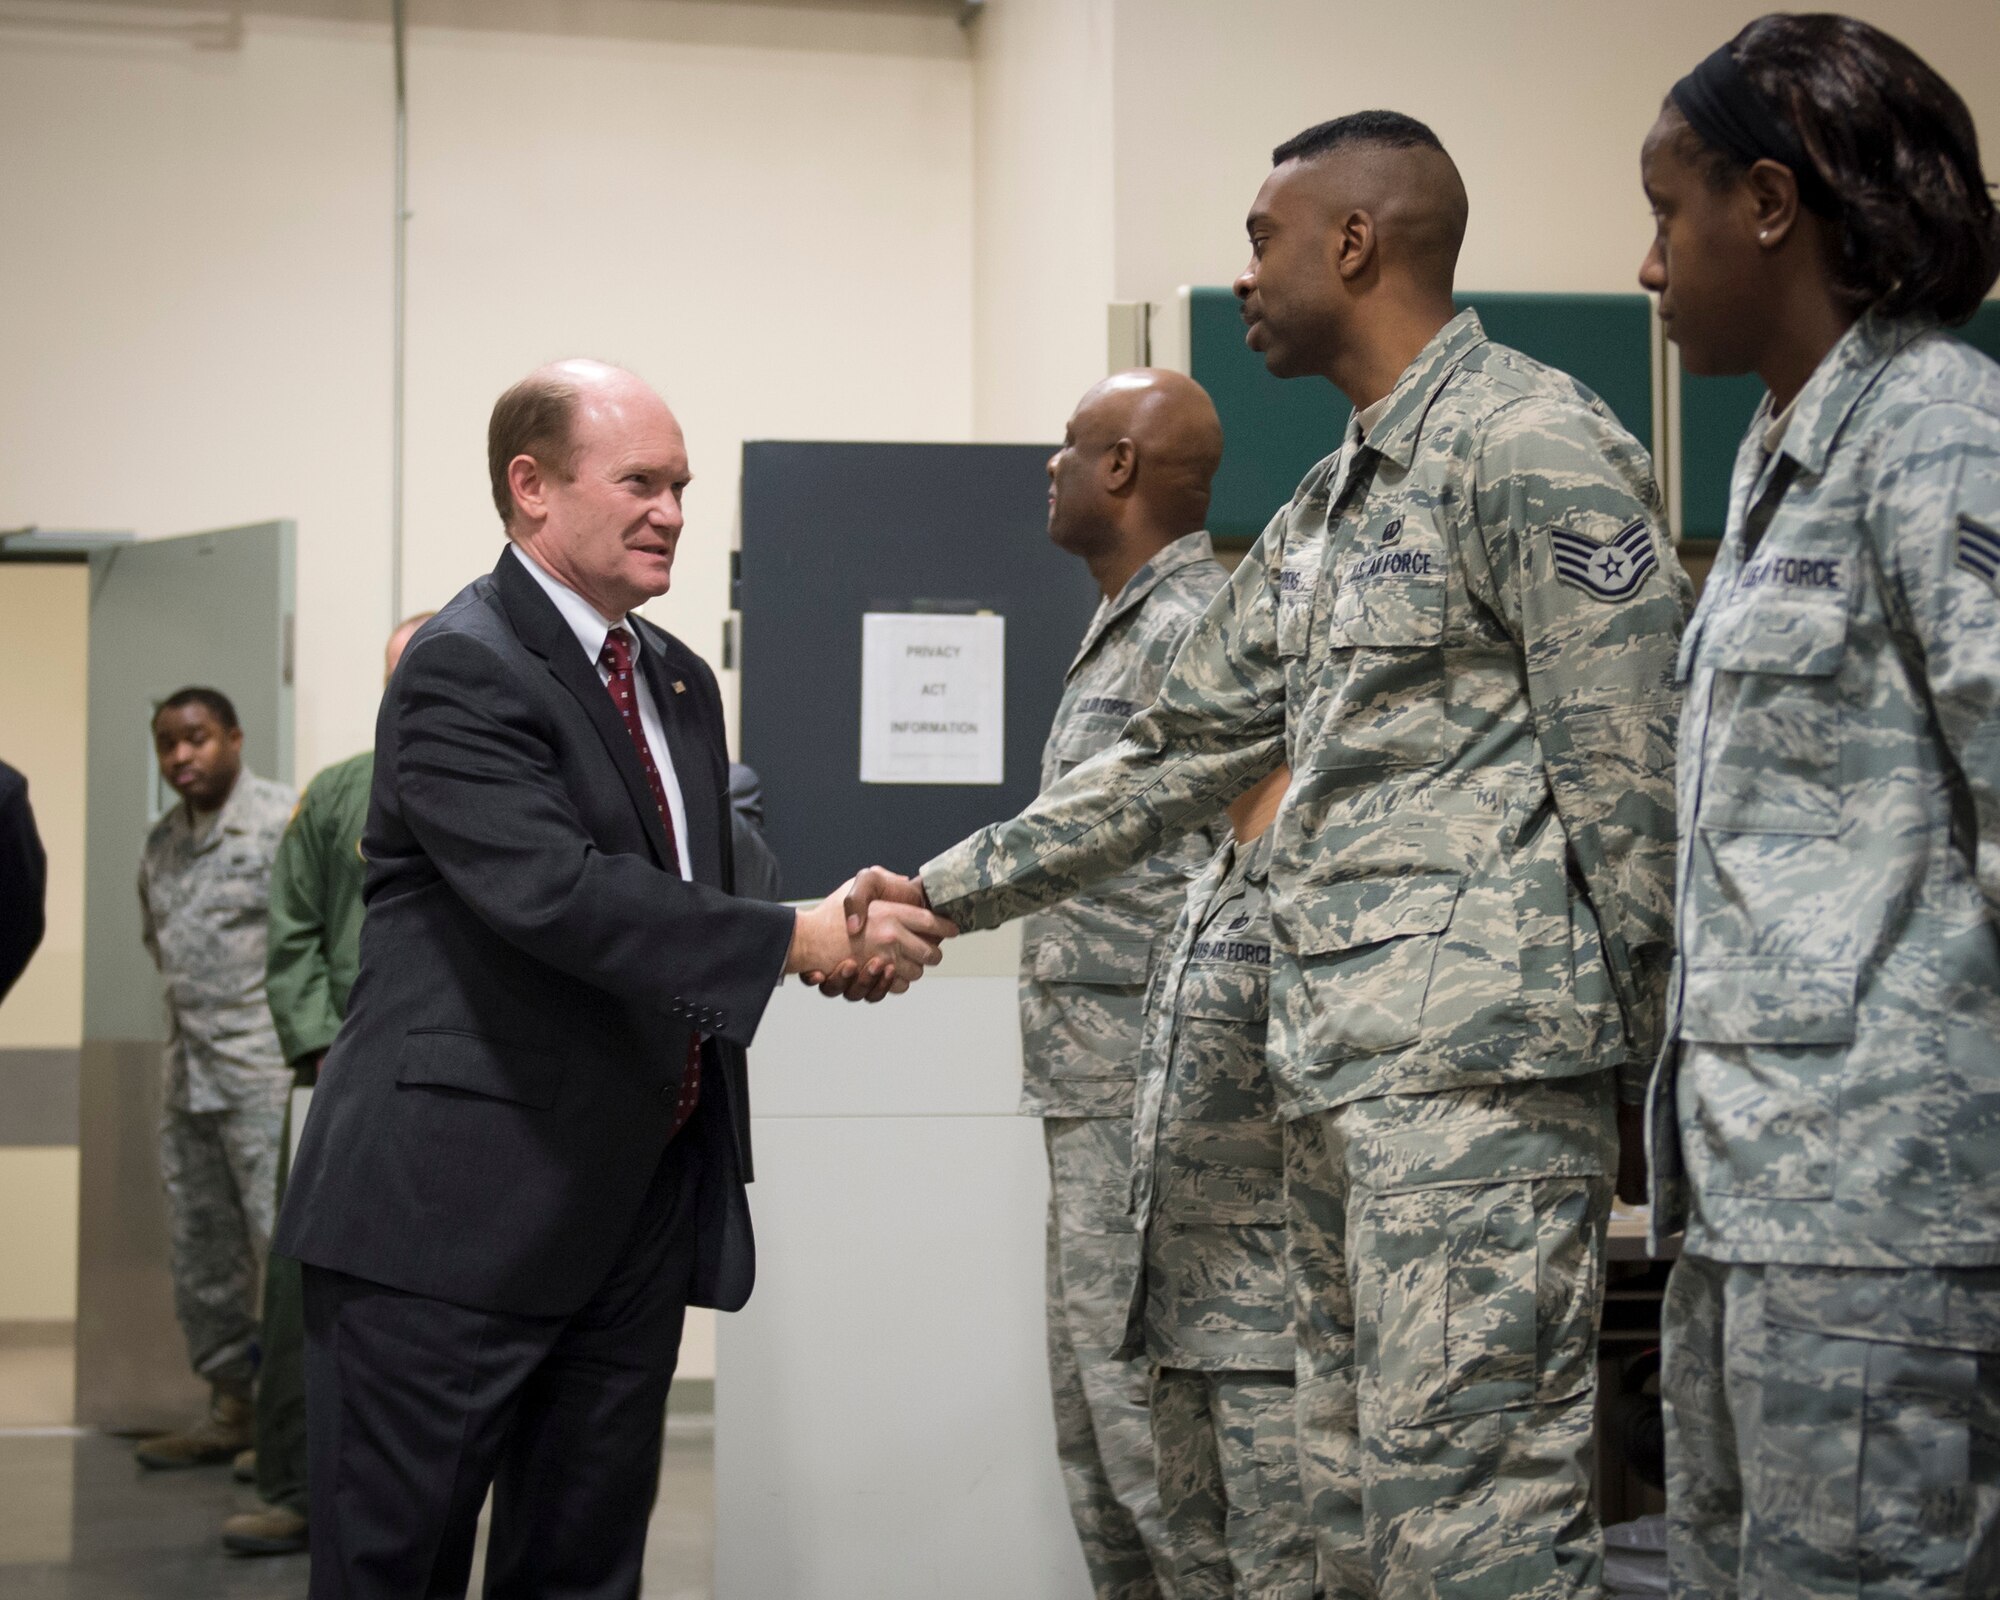 Sen. Chris Coons of Delaware shakes hands with Staff Sgt. Garry Giddens, a services NCO assigned to the Air Force Mortuary Affairs Operations departures section Feb. 9, 2015, at Dover Air Force Base, Del., during a visit to the mortuary. The senator thanked AFMAO for its continued commitment to returning all fallen U.S. service members with dignity, honor and respect. (U.S. Air Force photo by Capt. Ray Geoffroy)